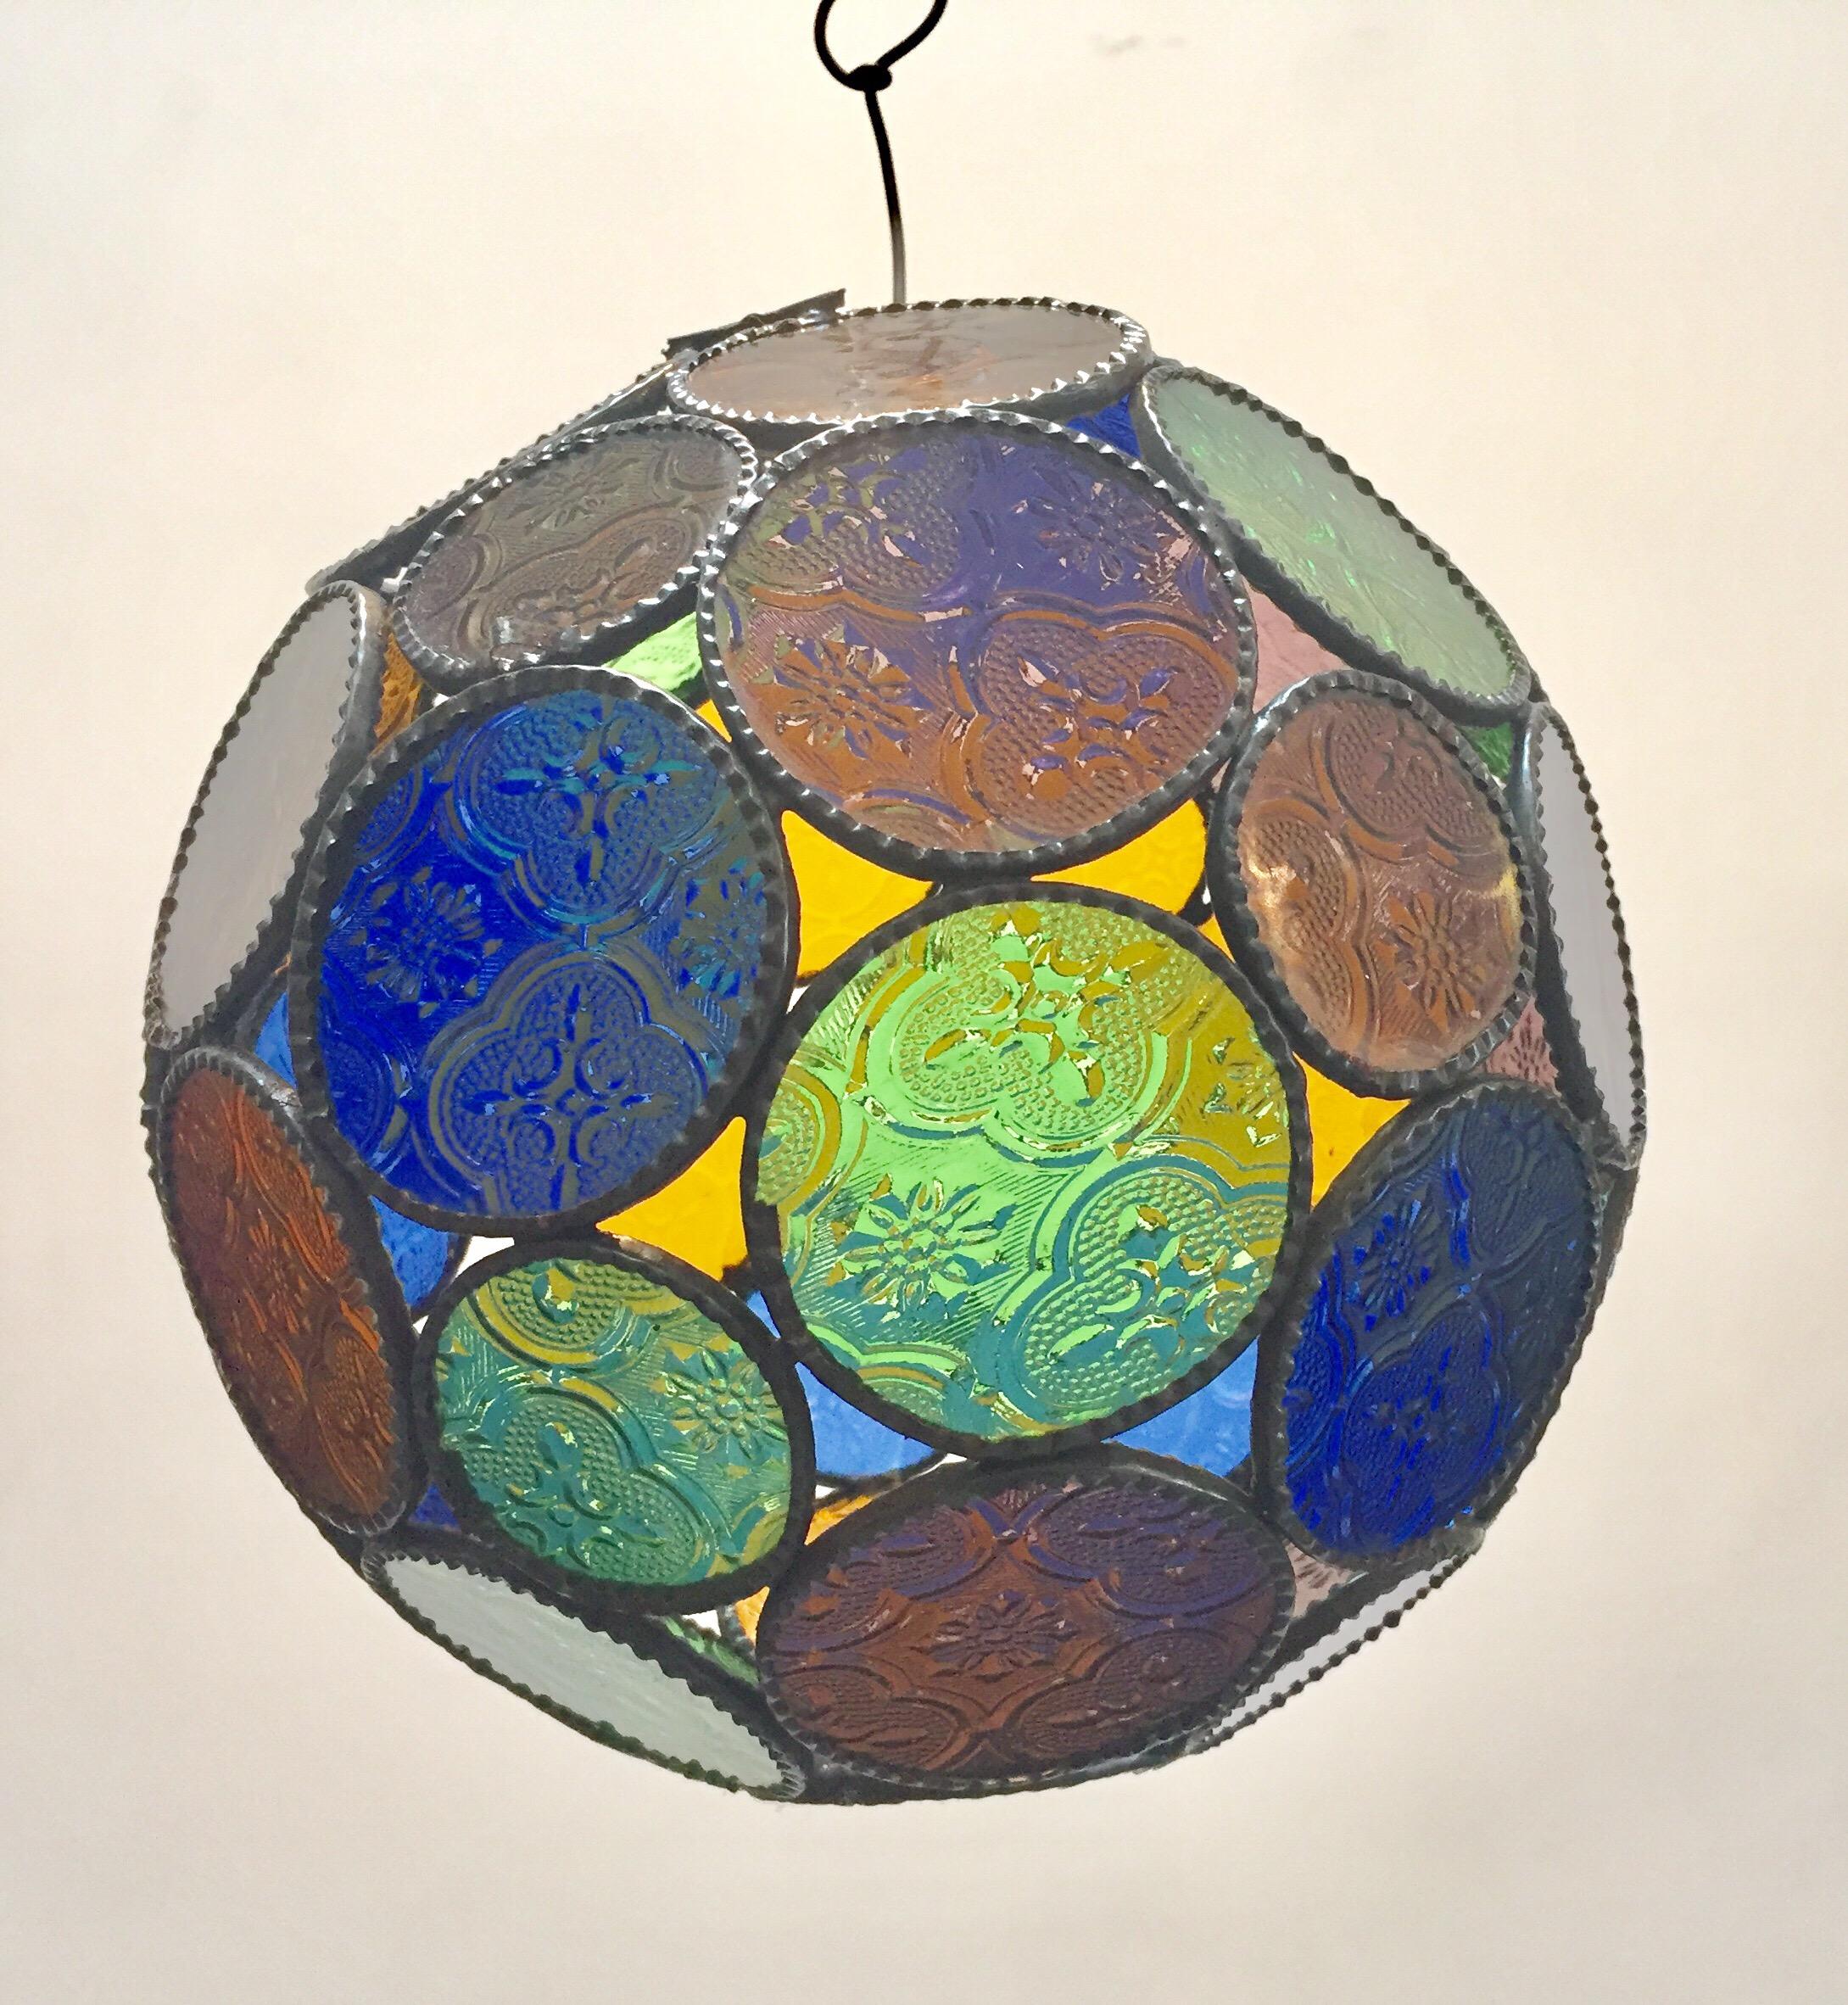 Handcrafted Moroccan multi-color glass lantern or Moorish pendant. Multi-color molded glass colors in blue, green, lavender and amber. with Moorish design circles put together in an orb style lamp. Handmade in Marrakech, metal rust color finish,